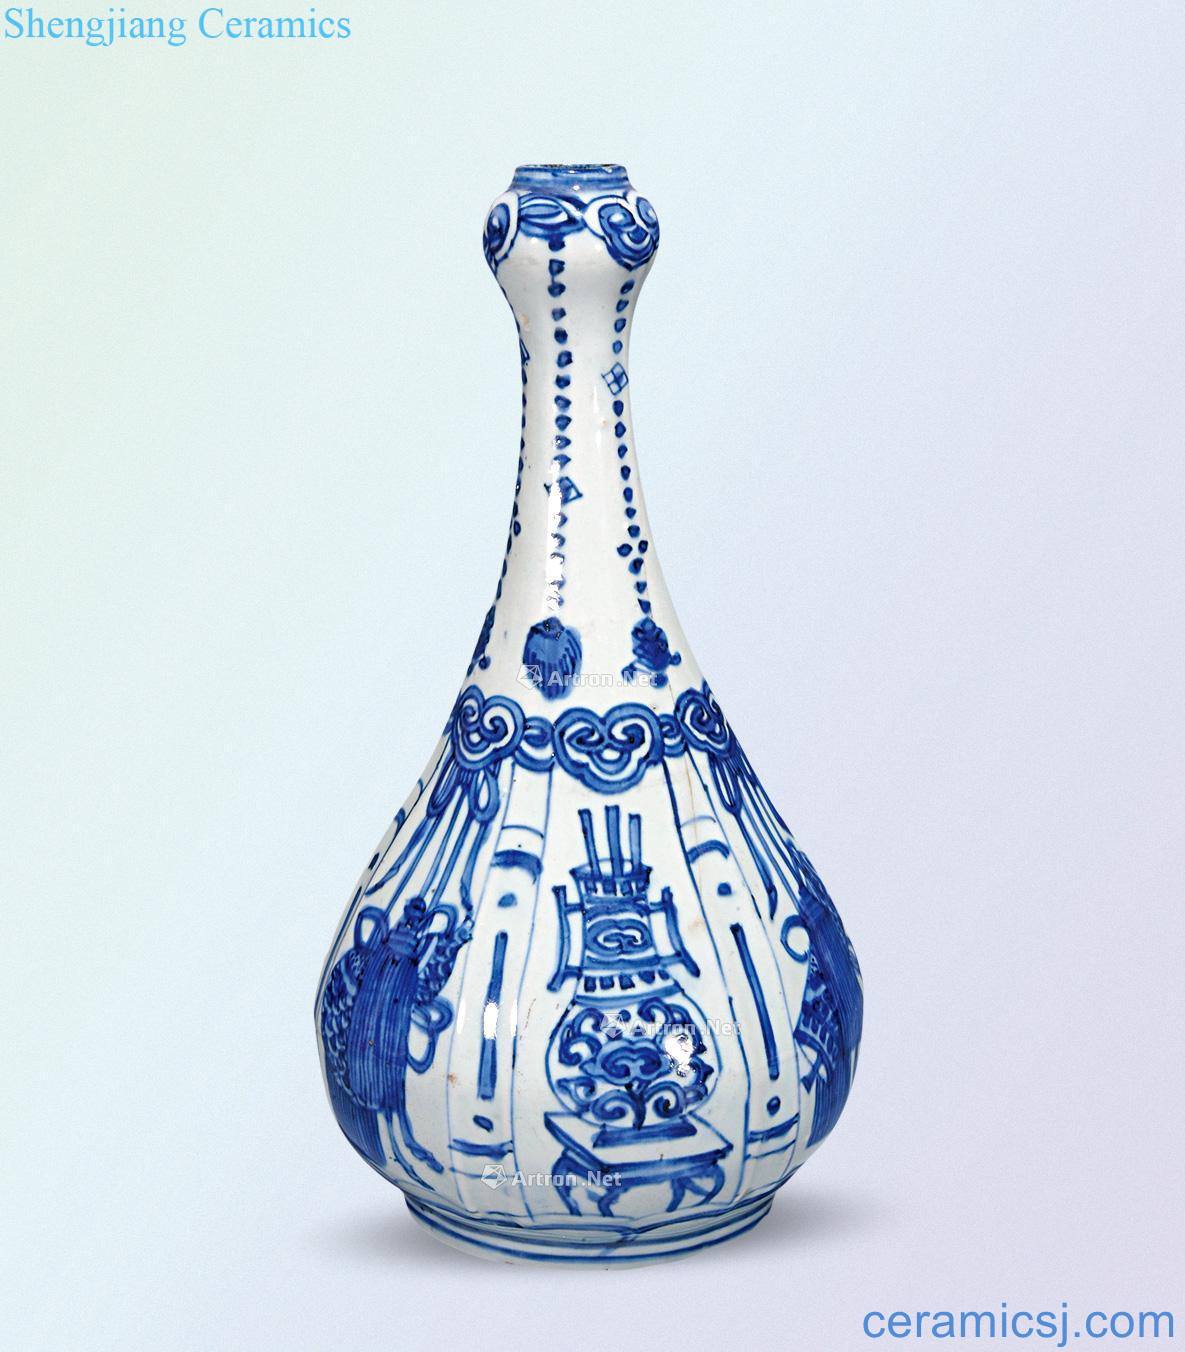 Qing dynasty blue and white flower bottles of garlic